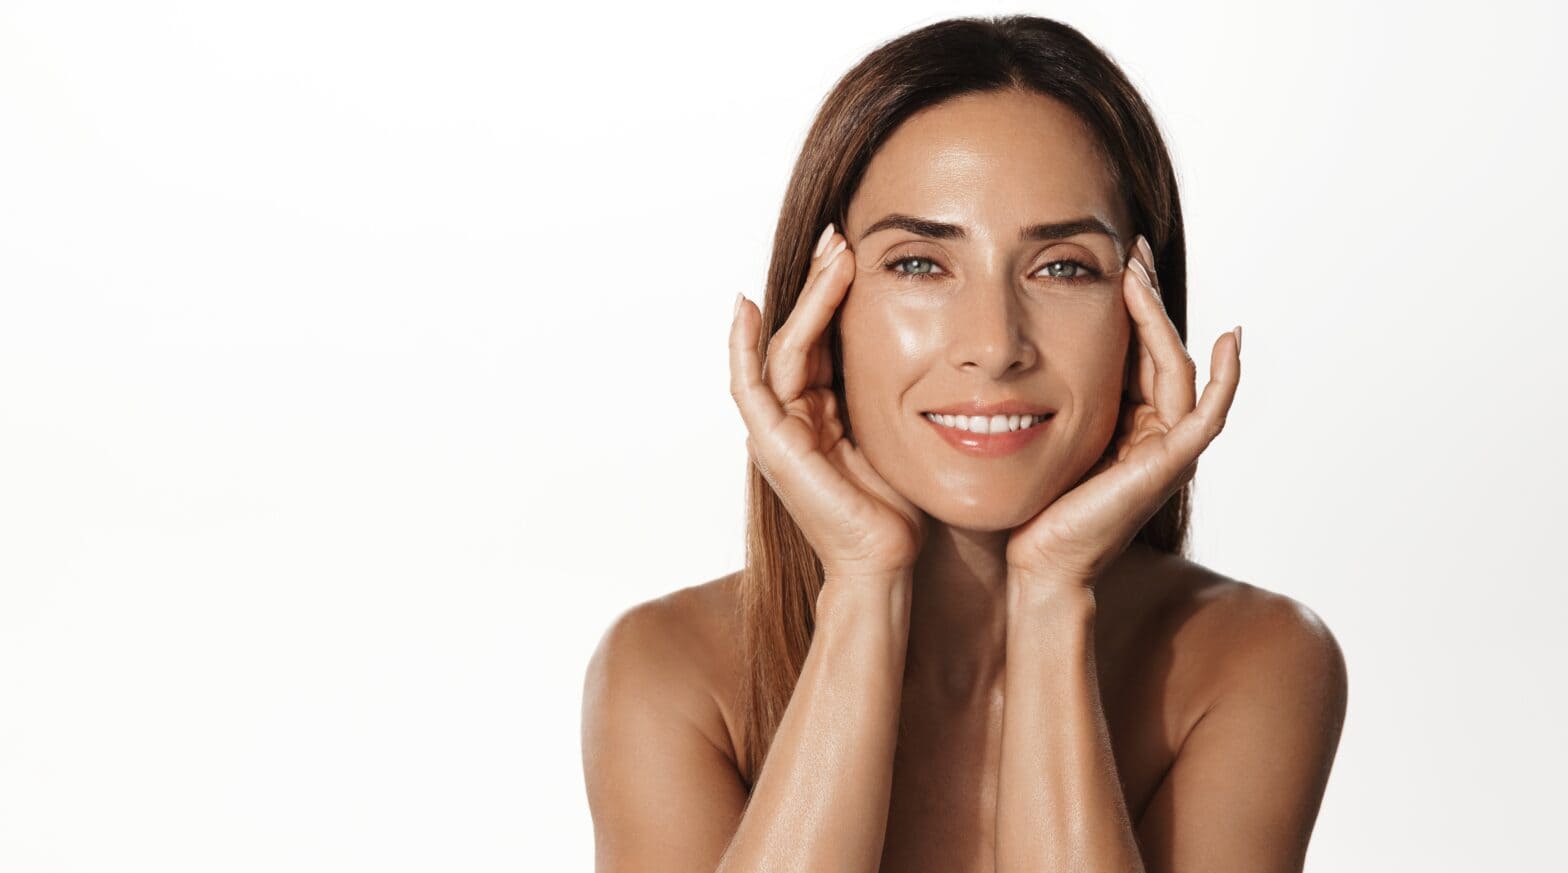 What is the Best Age to Get a Facelift?